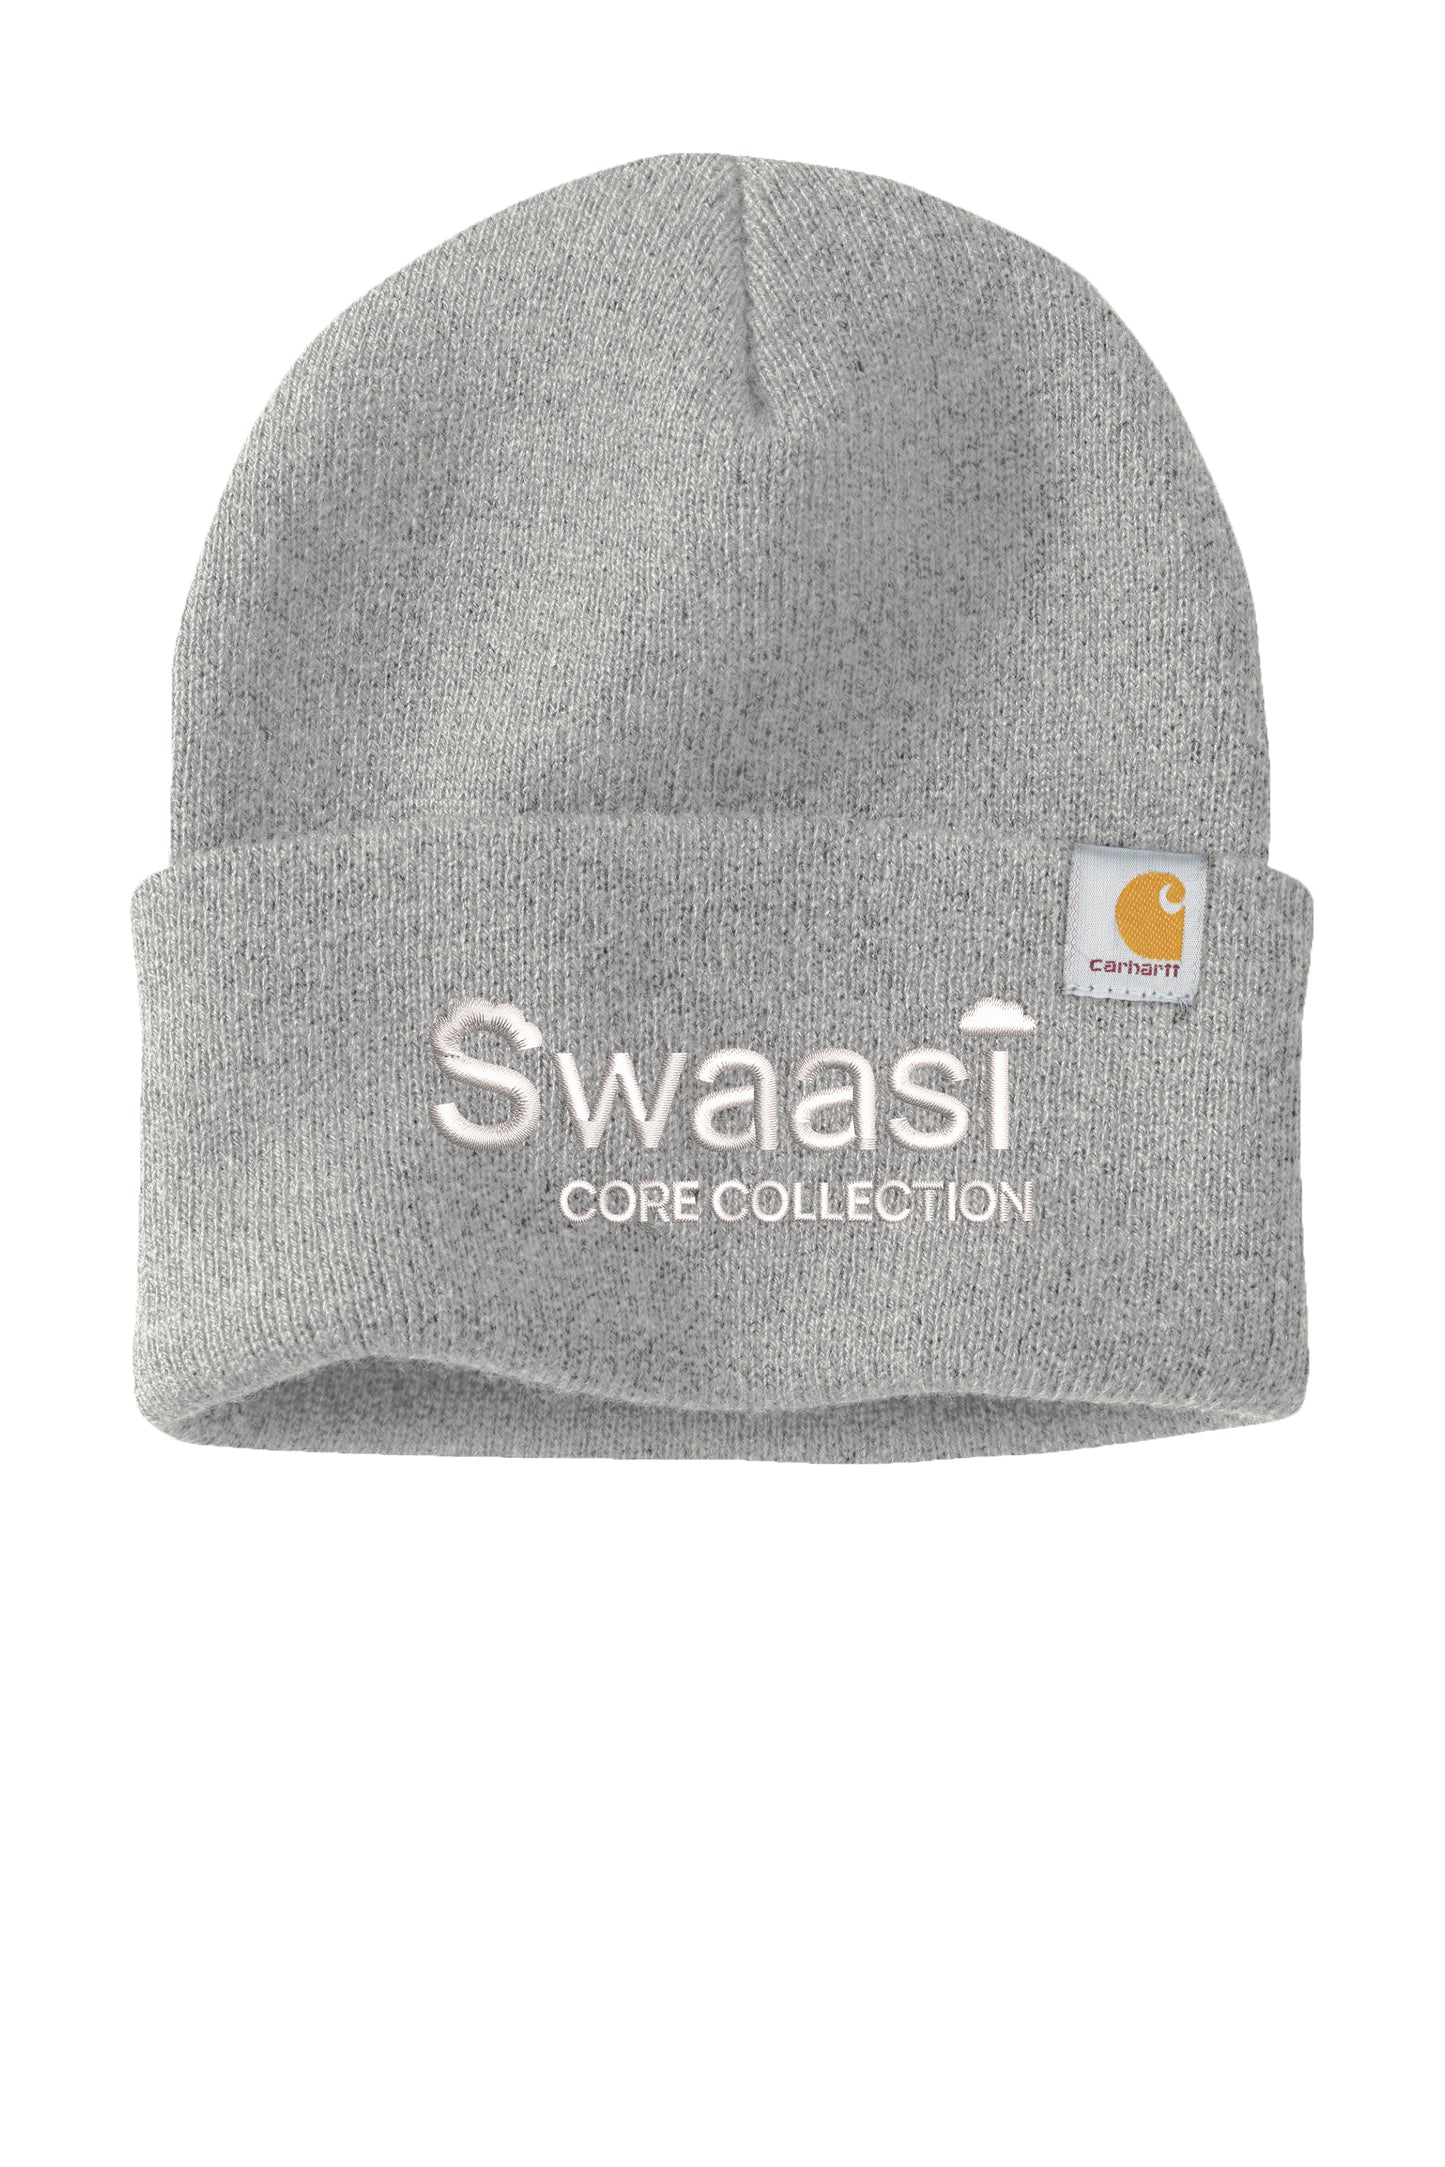 Swaasi Core - Carhartt® Watch Cap 2.0 with Embroidery Logo